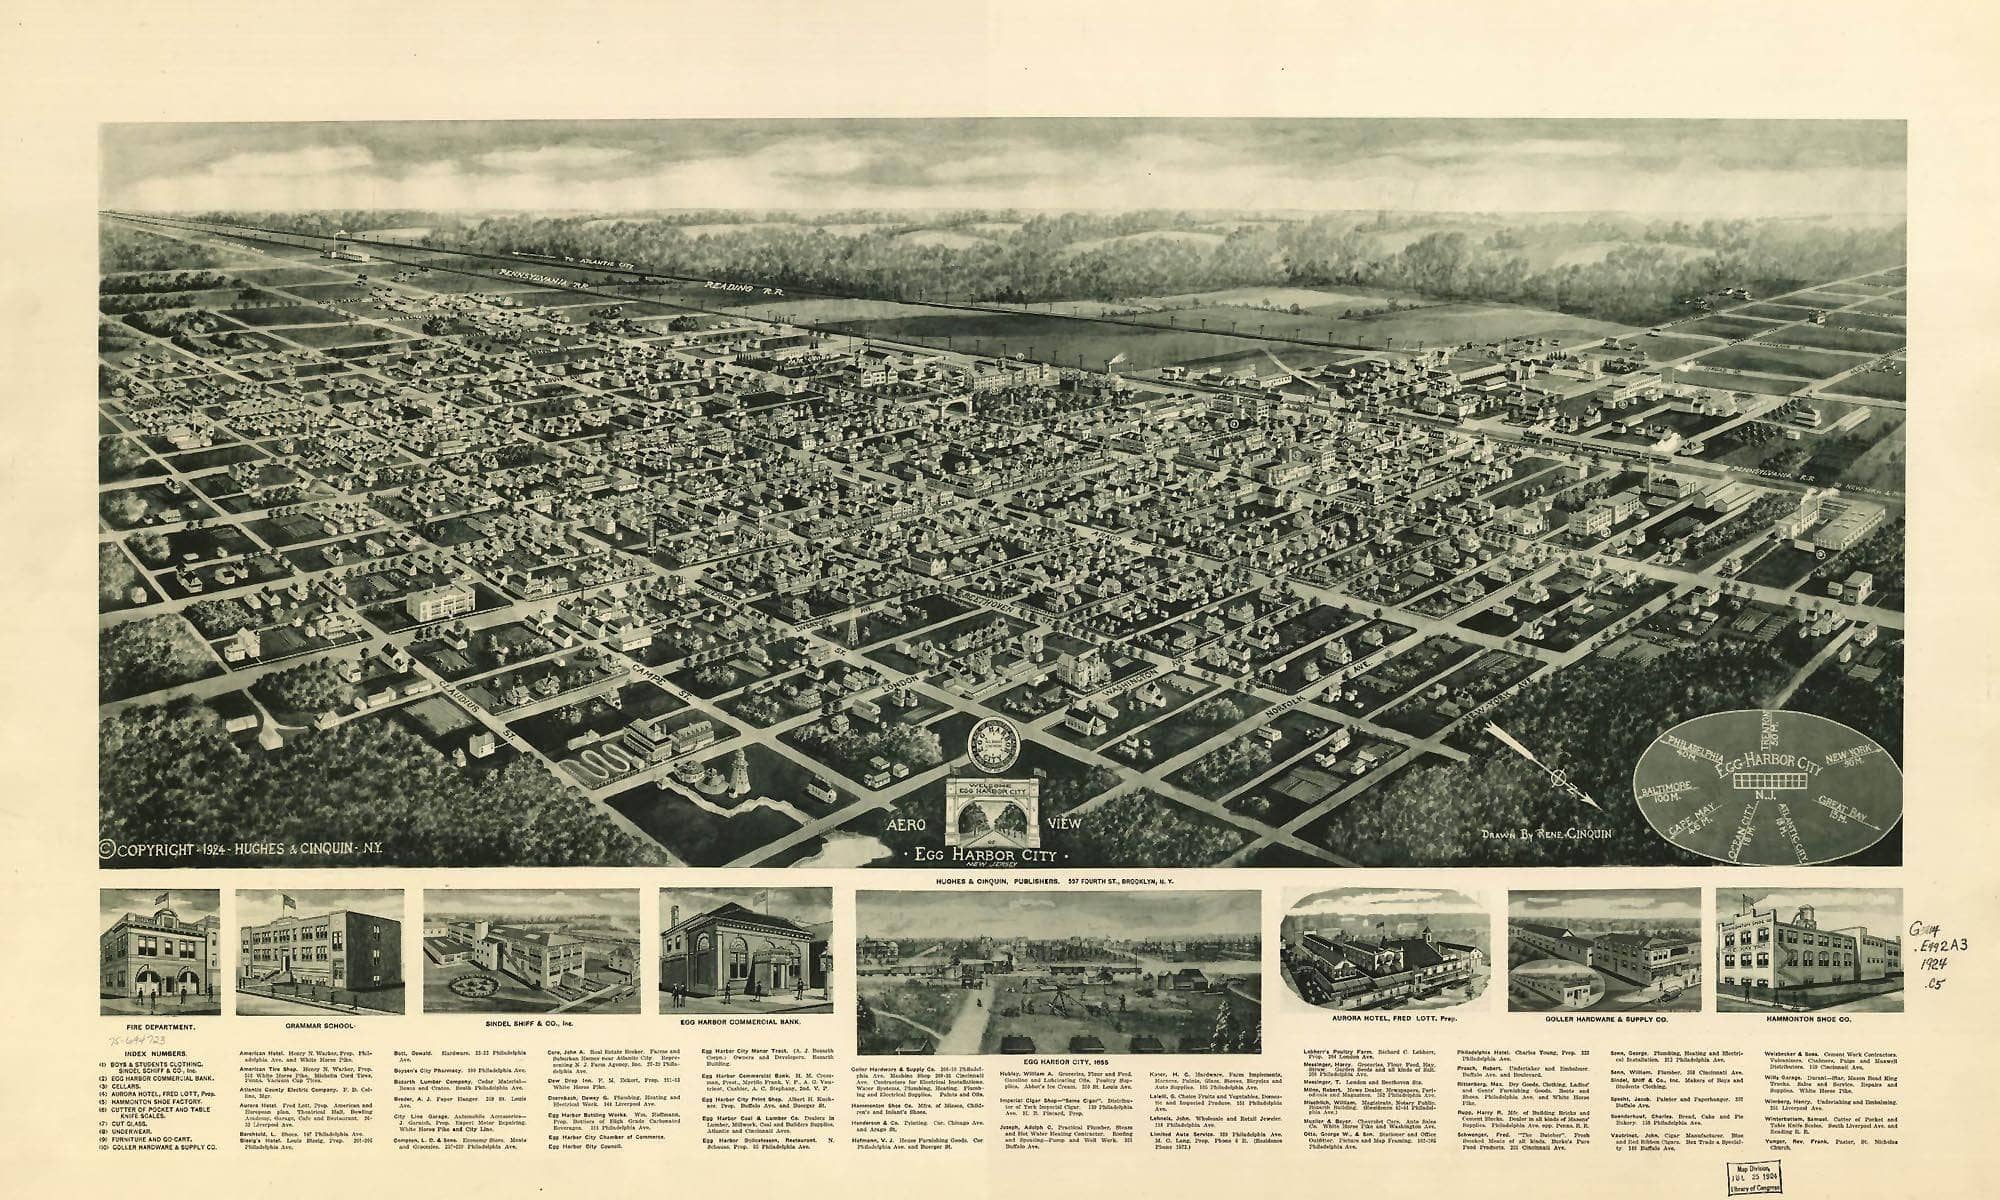 Cutler West Aero View Of Egg Harbor City New Jersey  State Of New Jersey